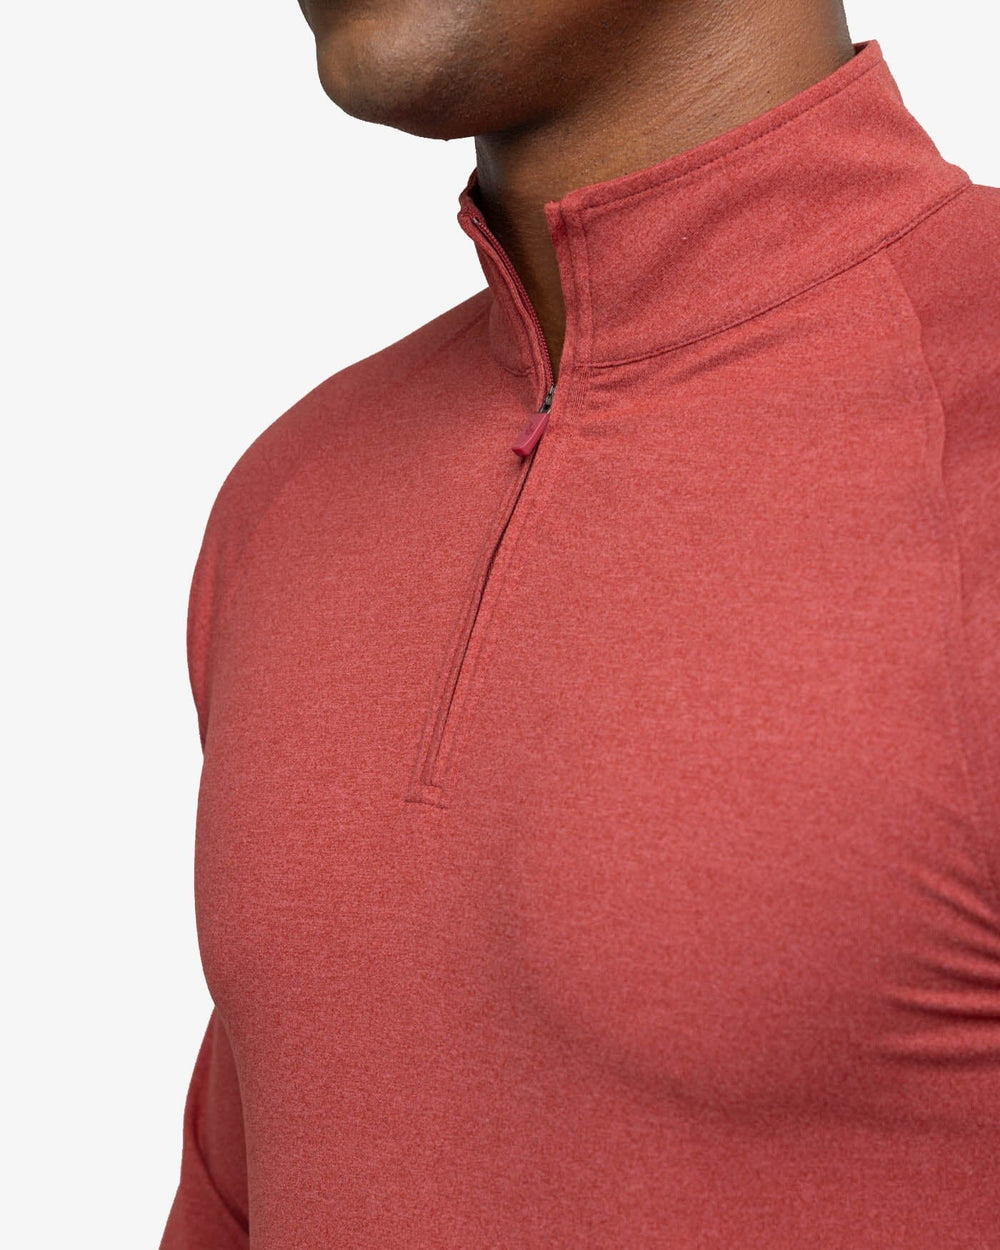 The detail view of the Southern Tide Cruiser Heather Quarter Zip Pullover by Southern Tide - Heather Tuscany Red